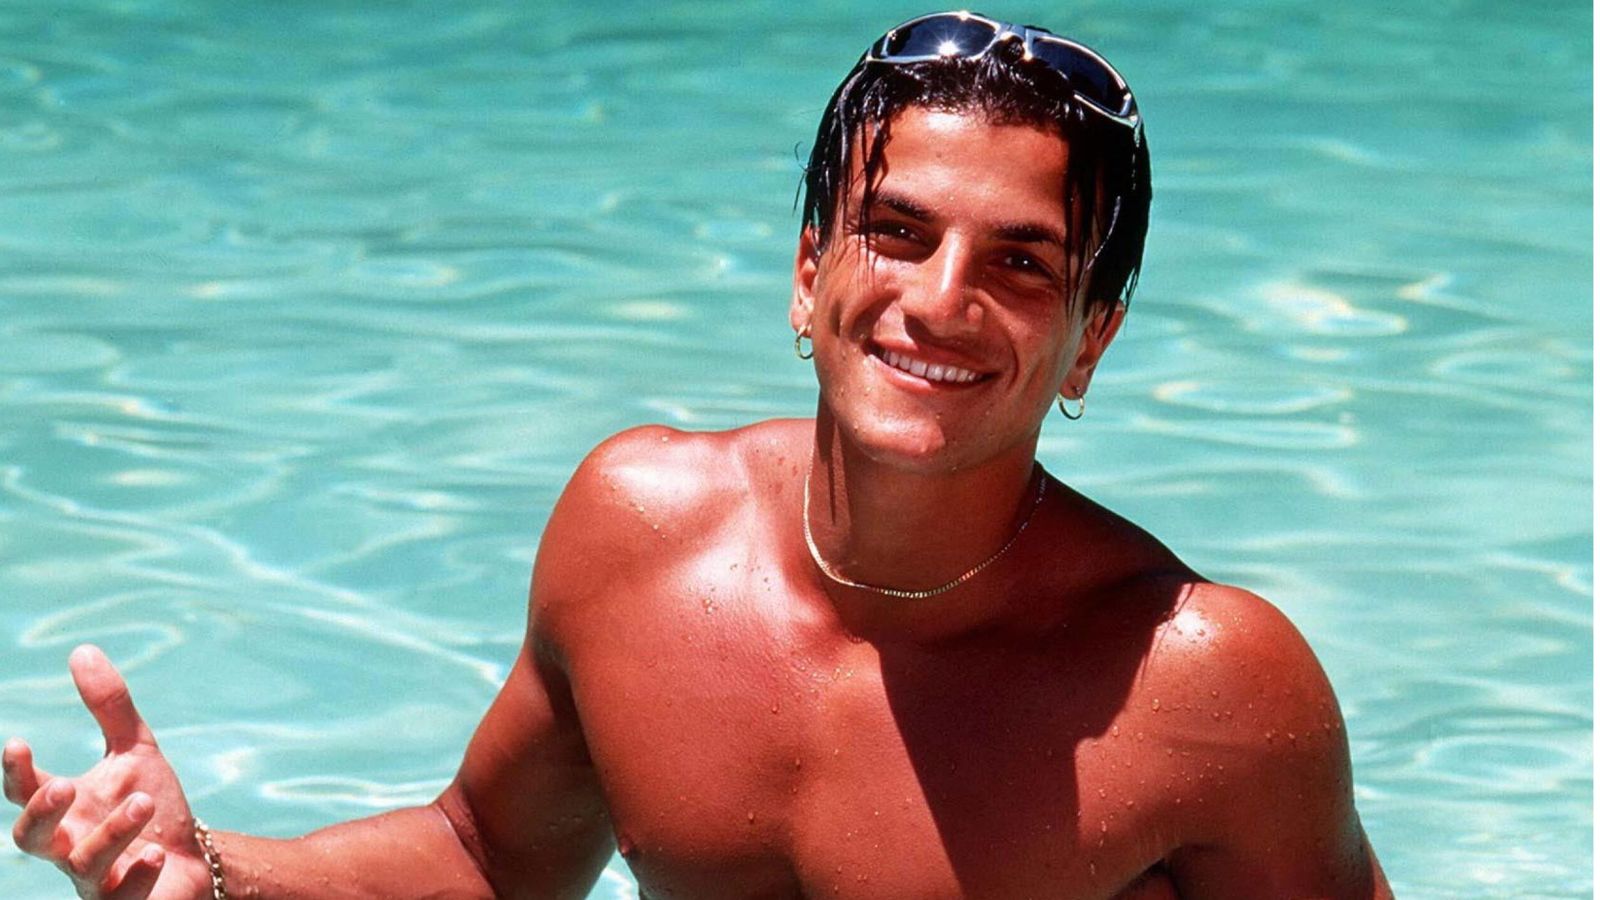 Peter Andre on his 90s haircut and what his children think of Mysterious Girl music video